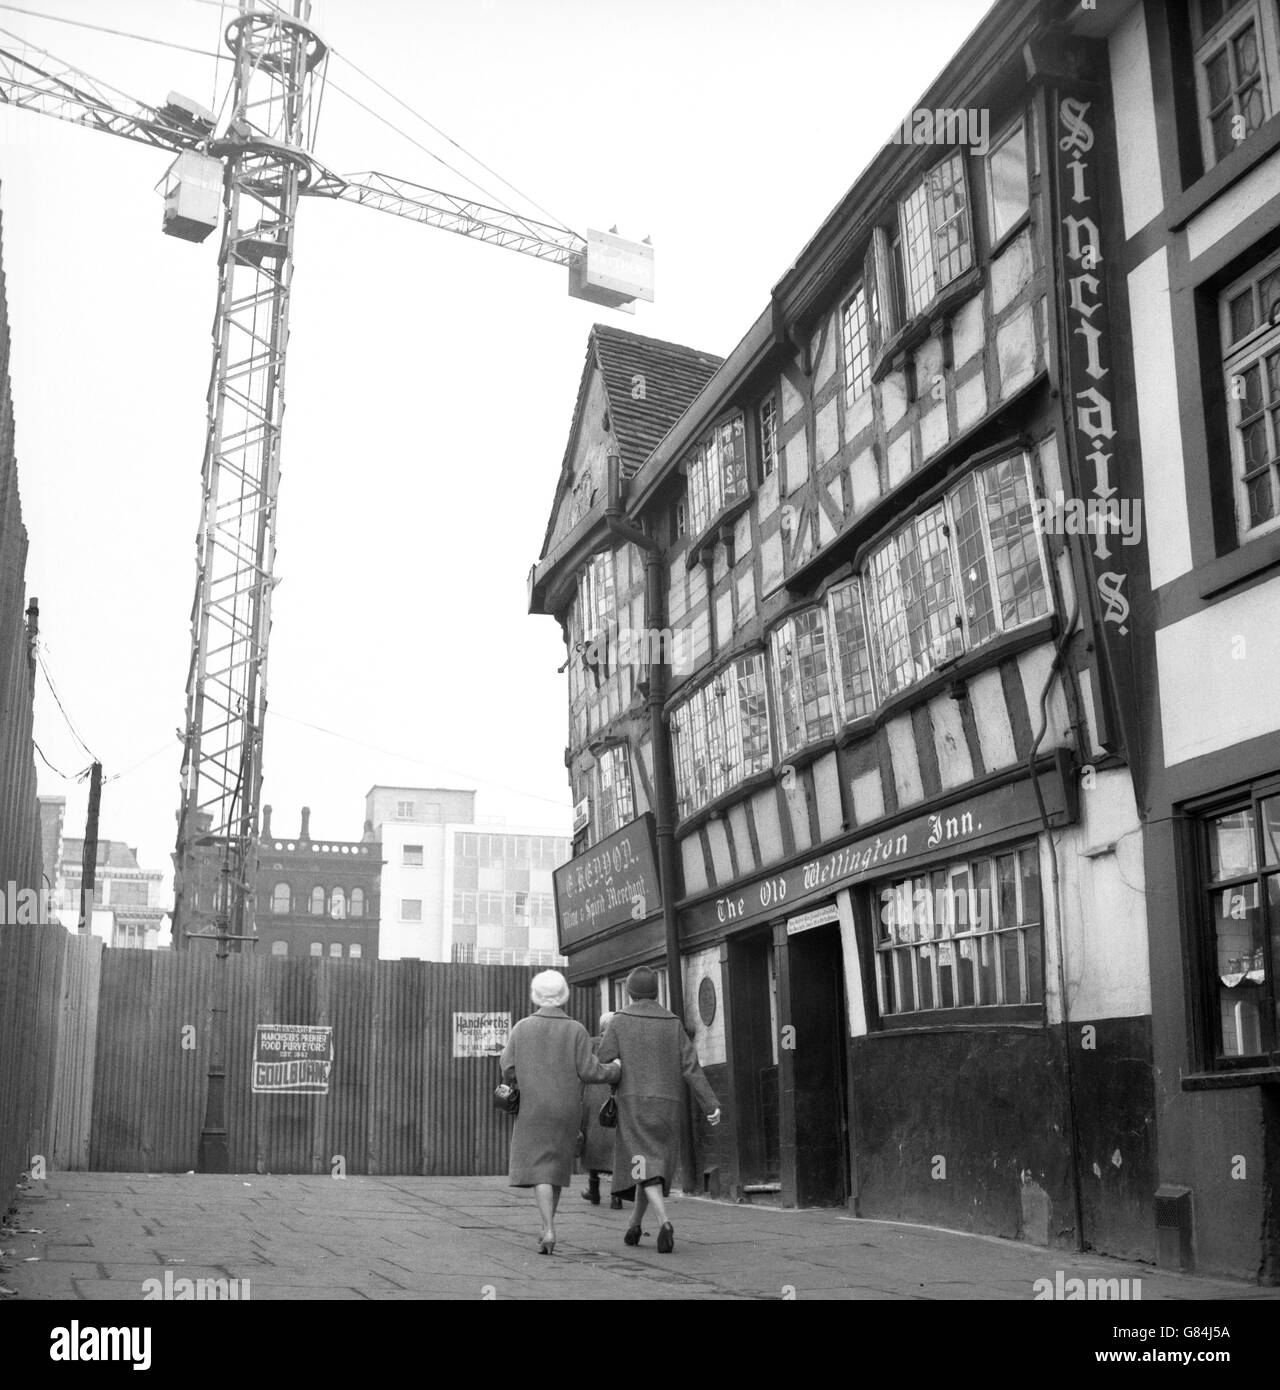 Manchester's oldest pub The Wellington, which has had a license since 1830. The building dates back to 1328. Stock Photo